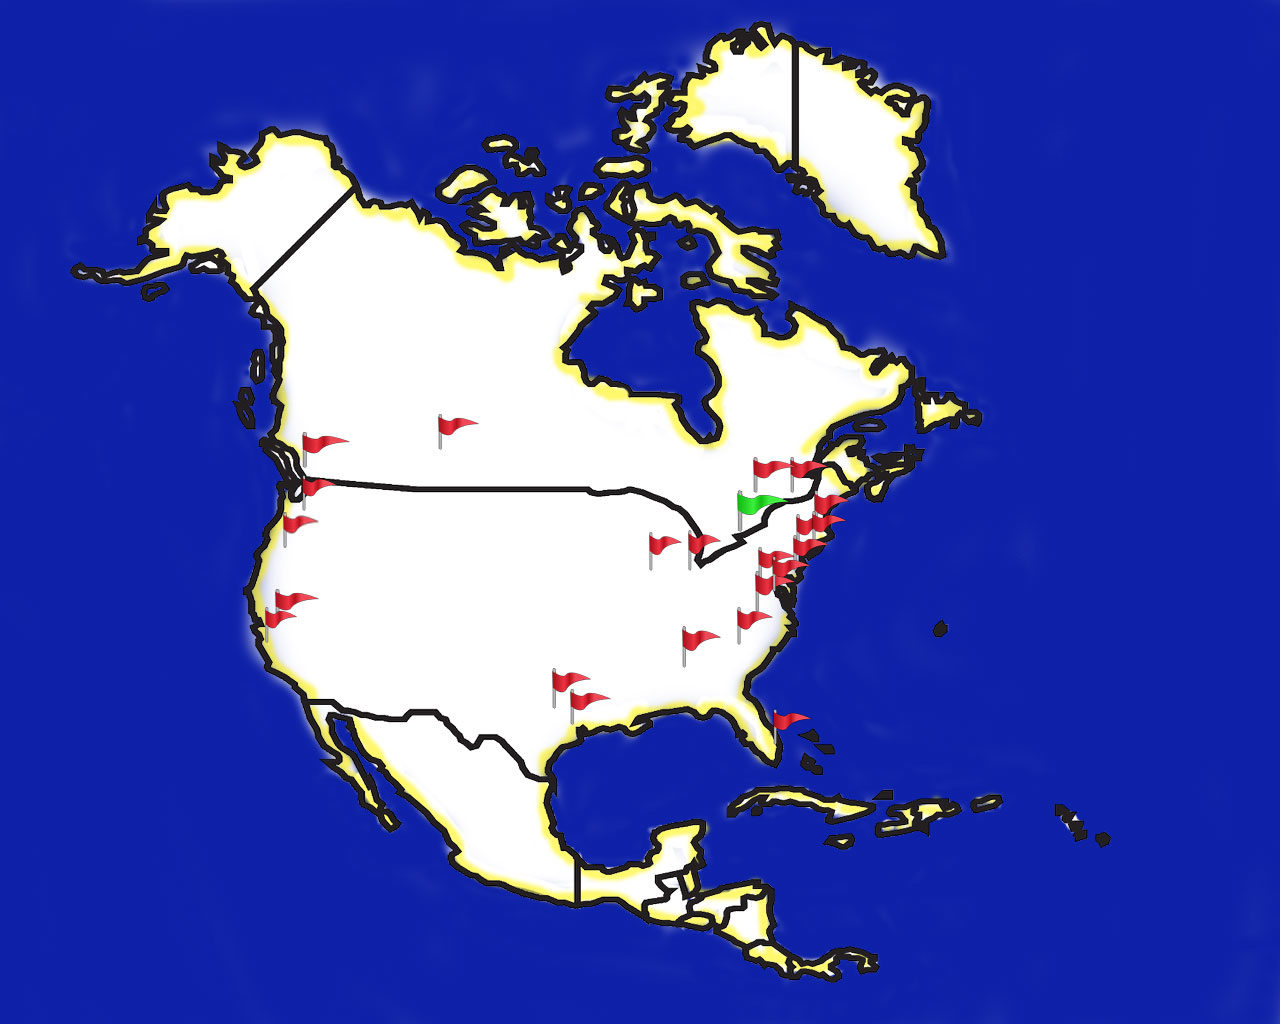 North America map marked with flags